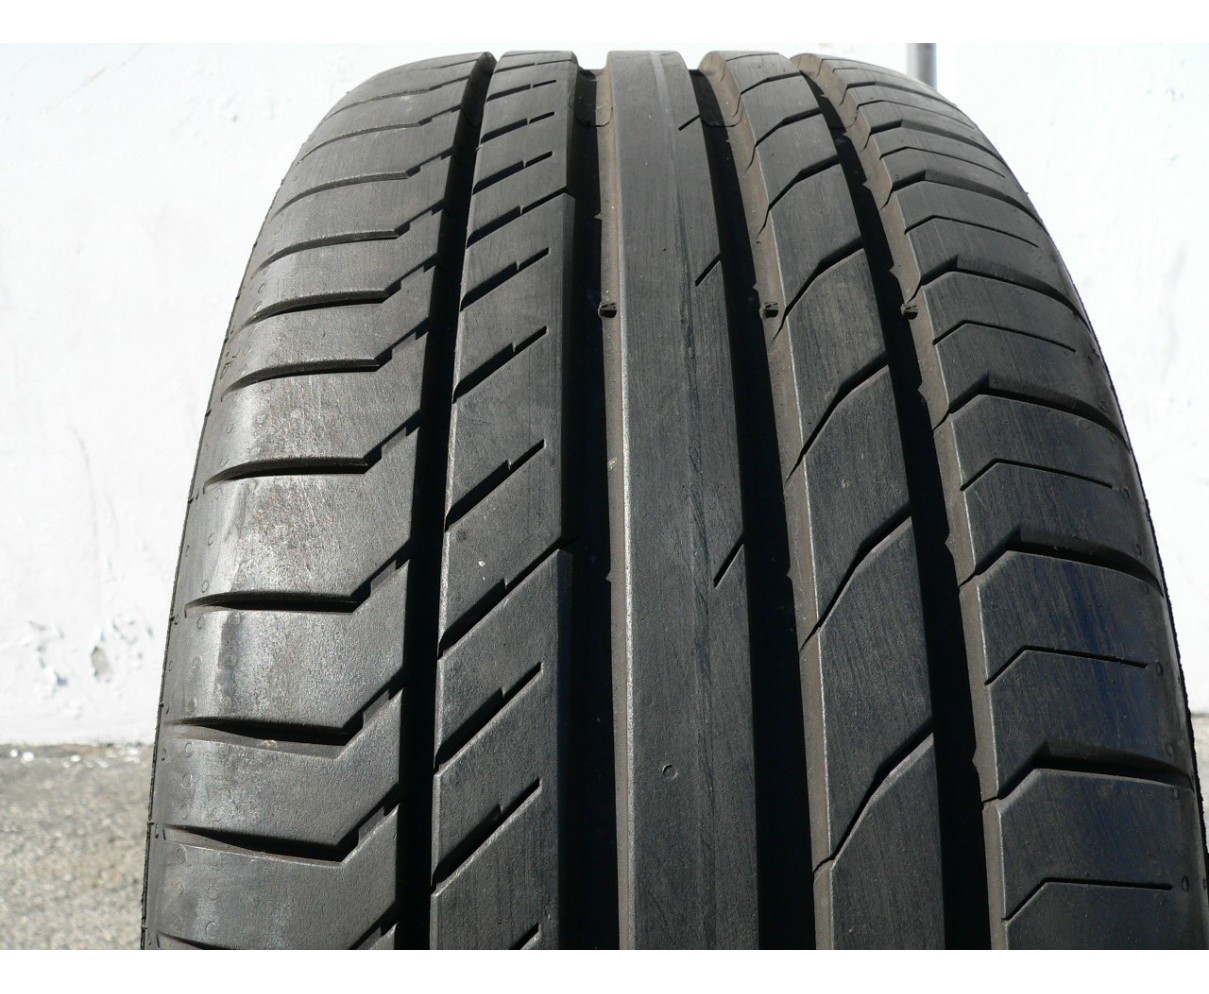 235 4 90% ContiSportContact life 45 95V Continental tires Run Flat 5 19 used